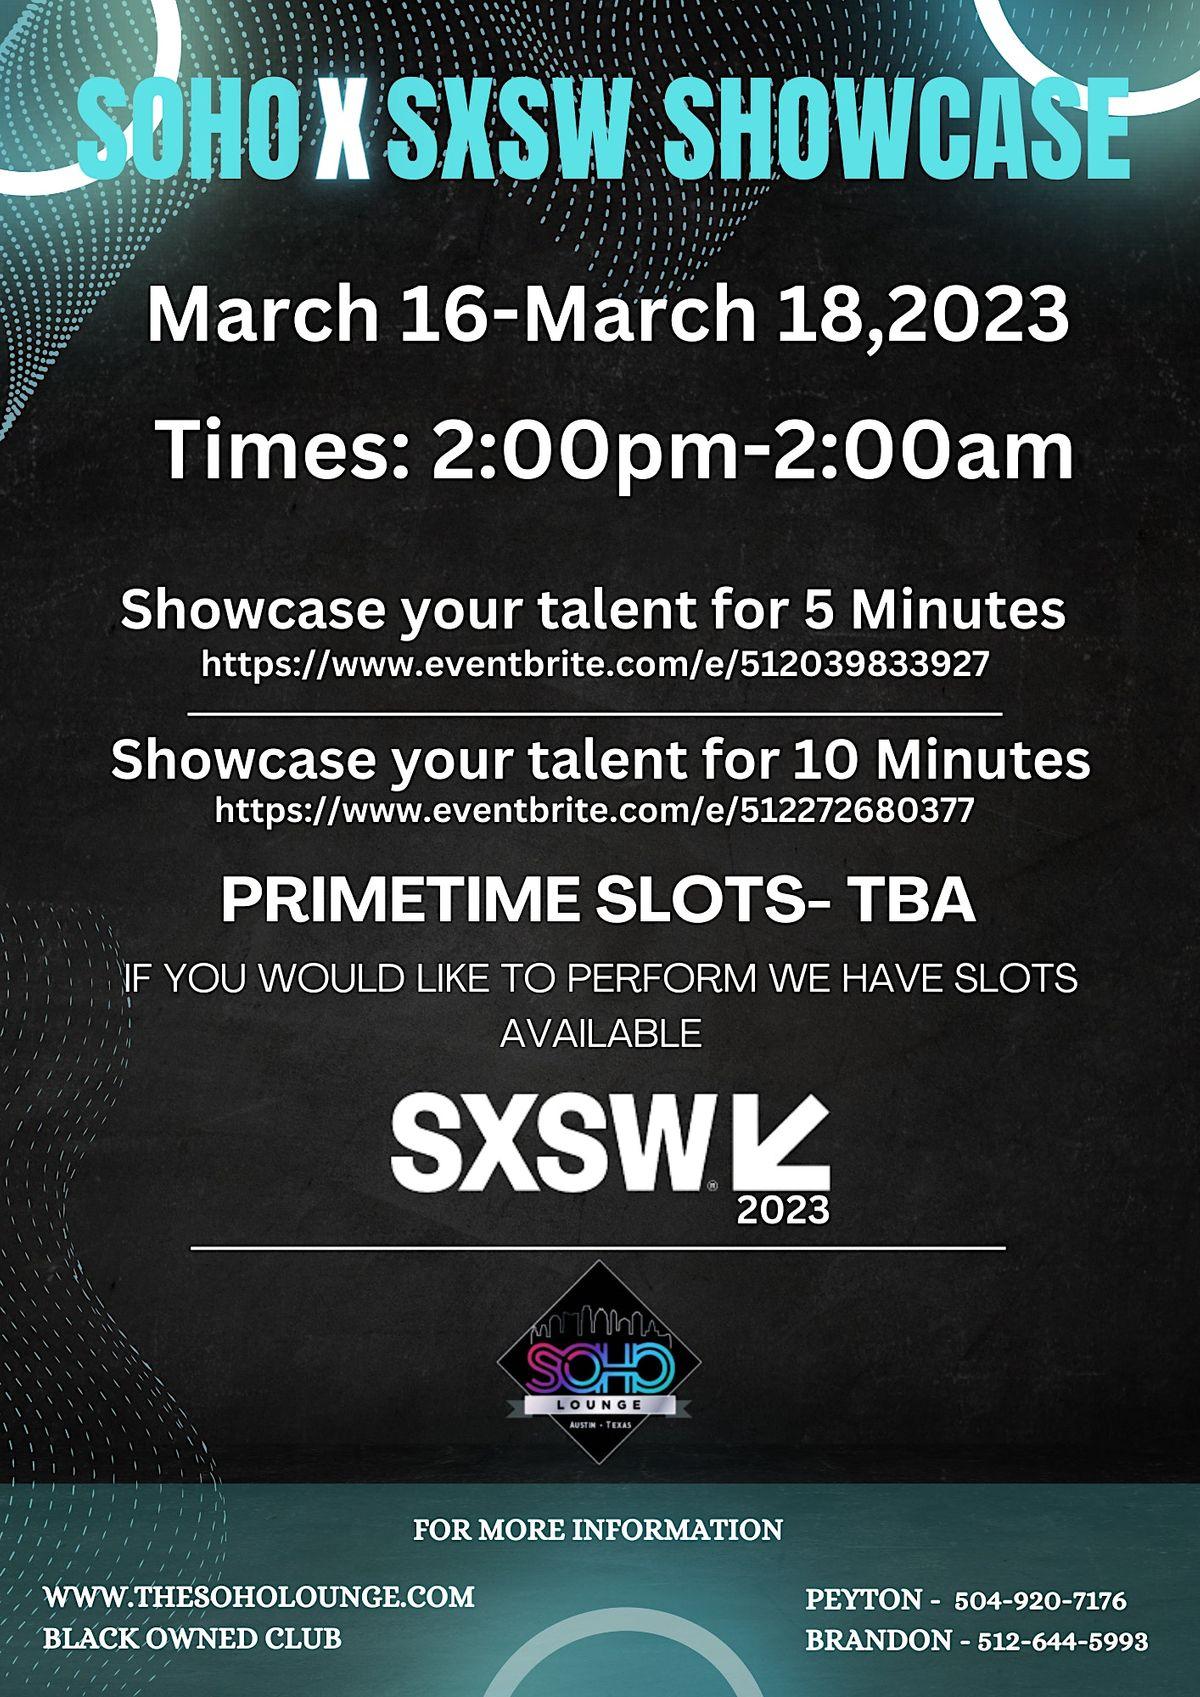 Showcase your talent for 10 Minutes